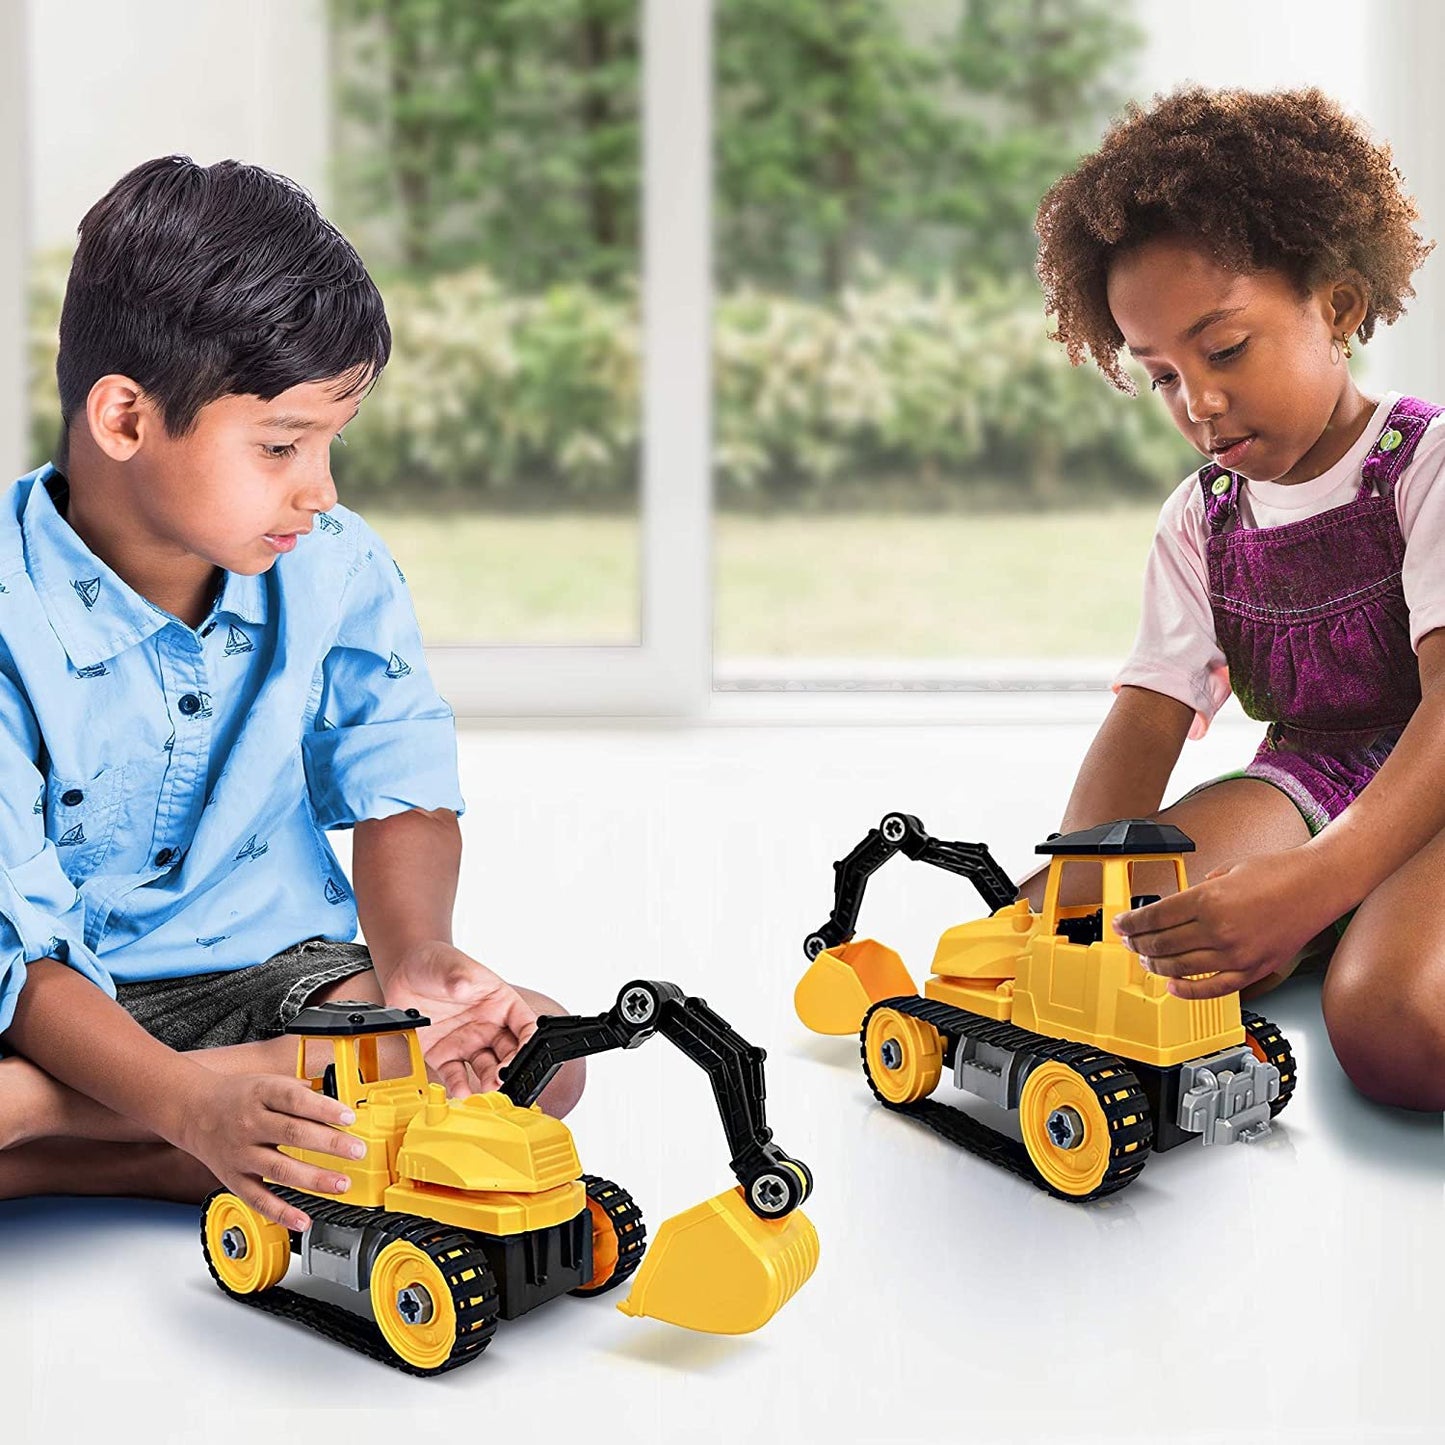 ArtCreativity Take Apart Yellow Construction Toy Truck - 43 Pieces with Tools - Large Excavating Backhoe Toy - Perfect Digger Toy and Great Birthday Gift Idea for Boys and Girls Ages 3+